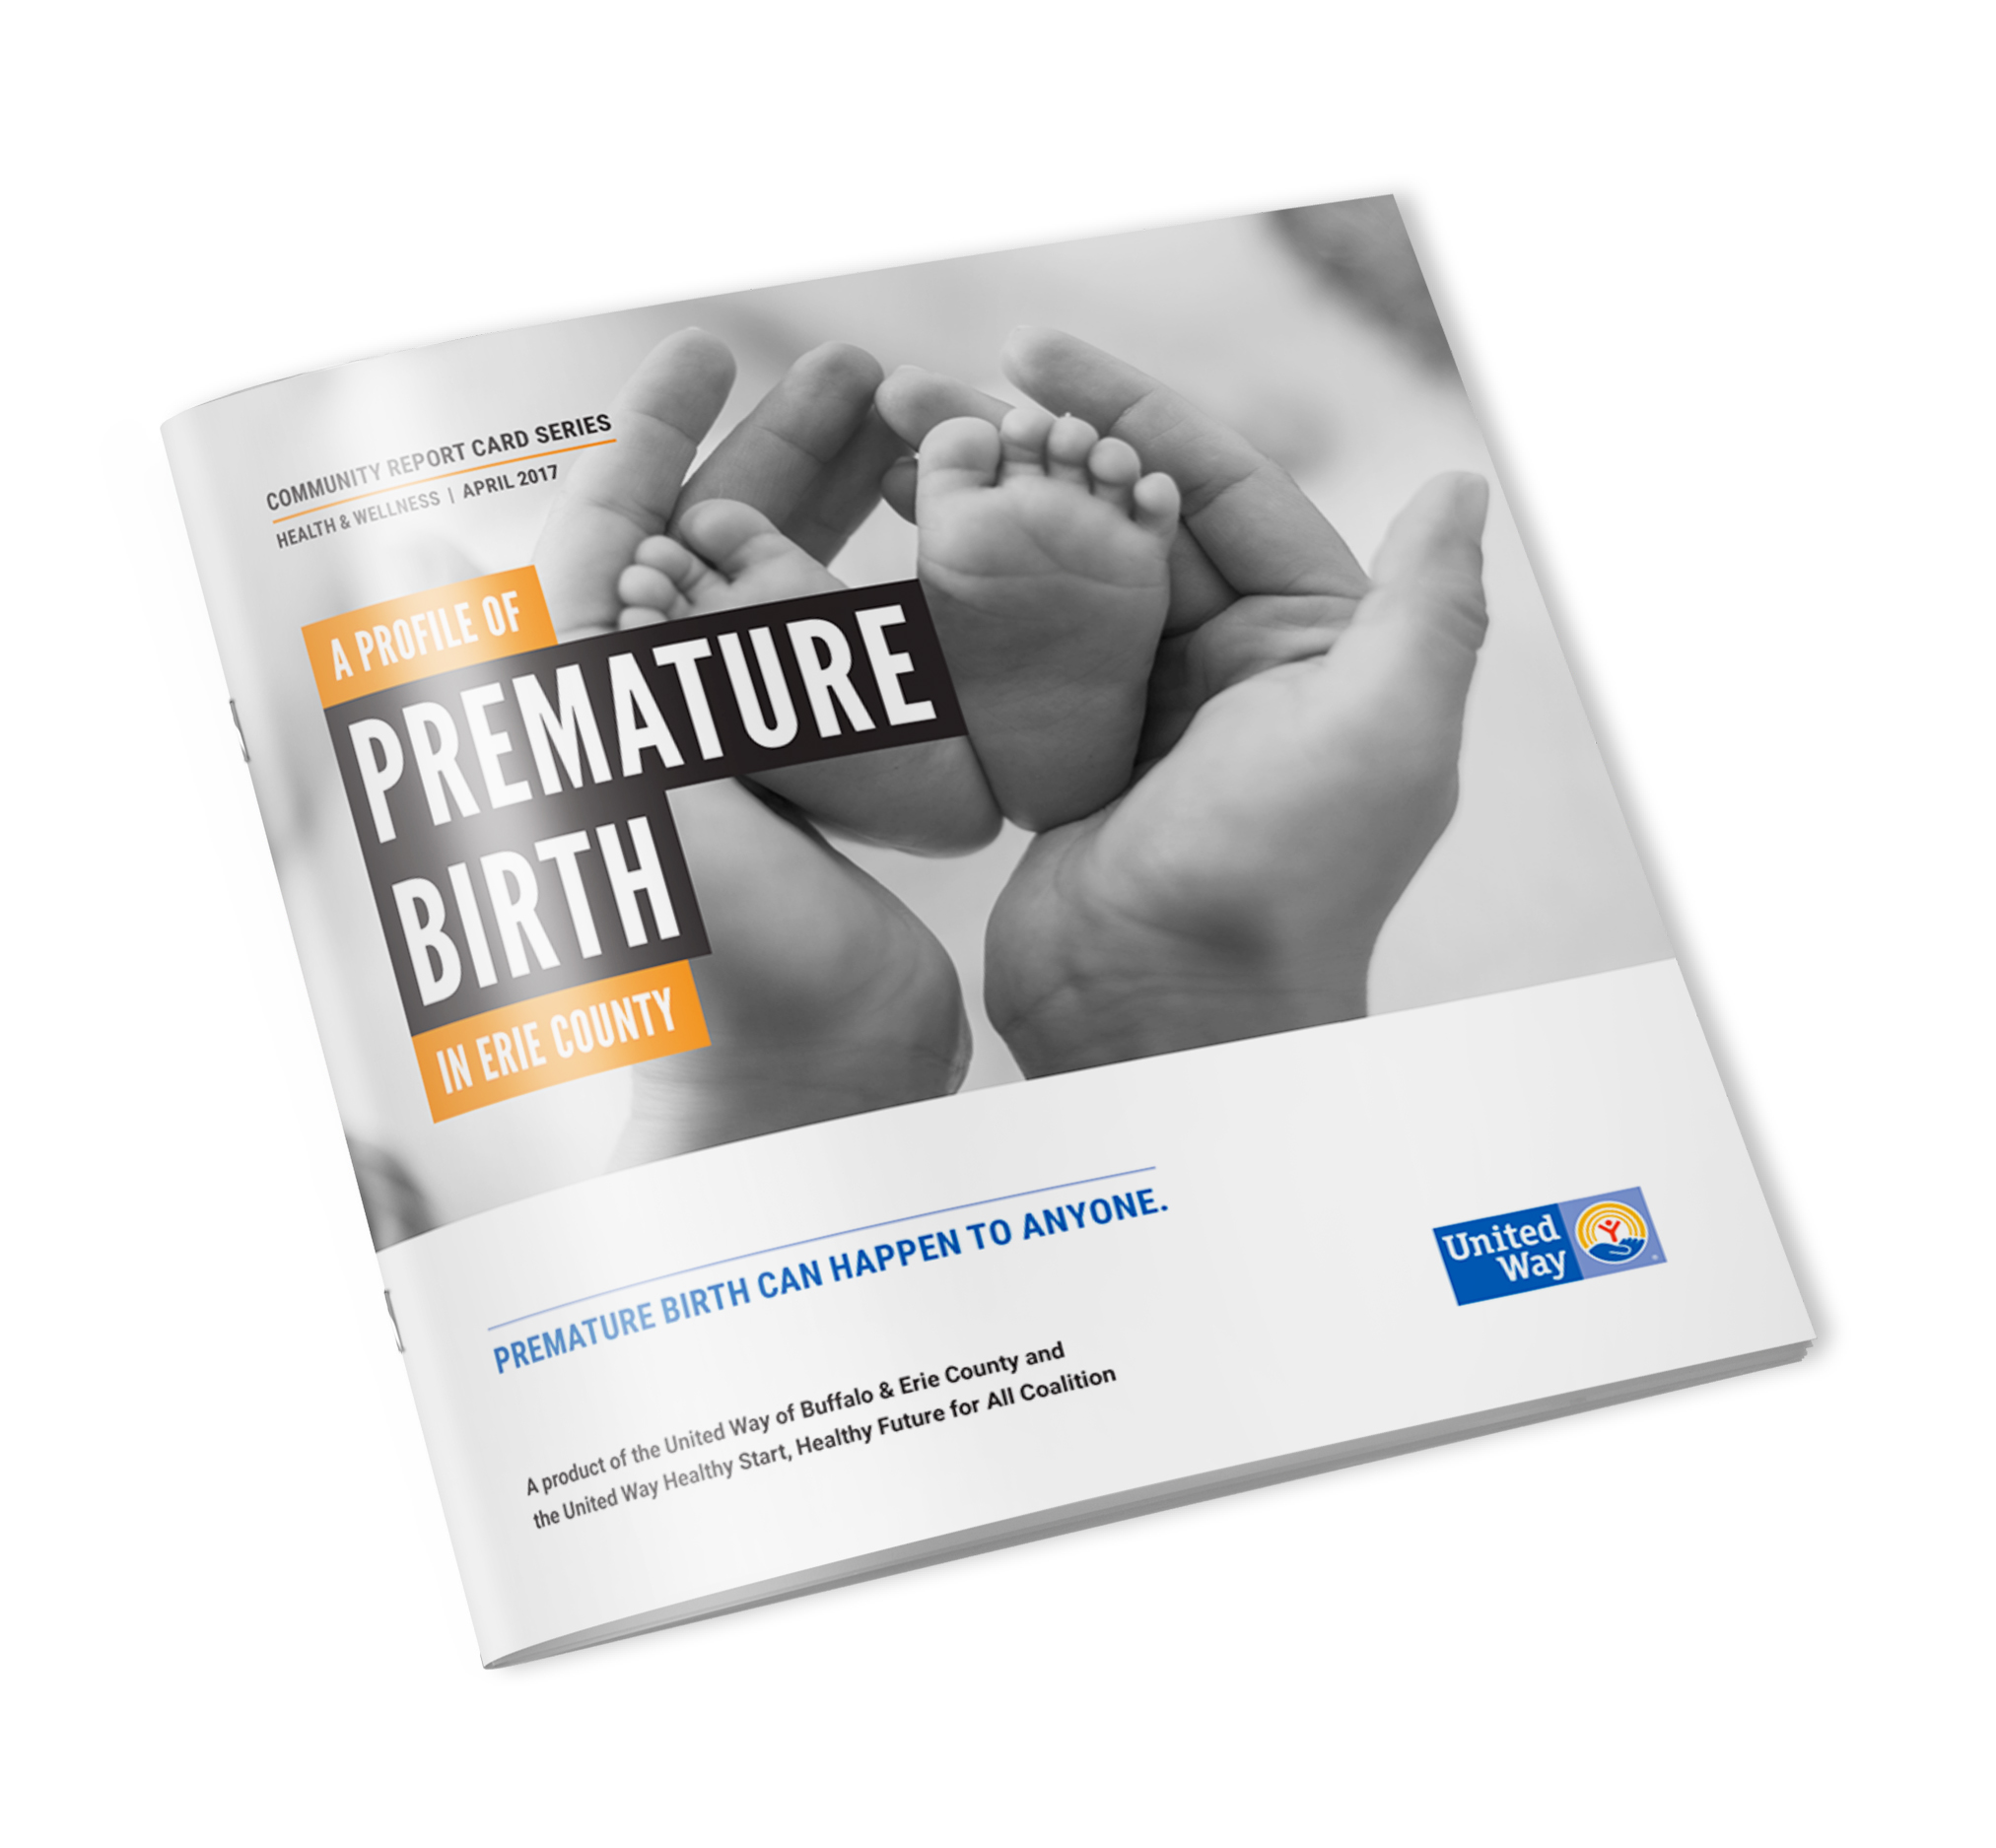 This is a picture of United Way's Premature Birth information magazine.